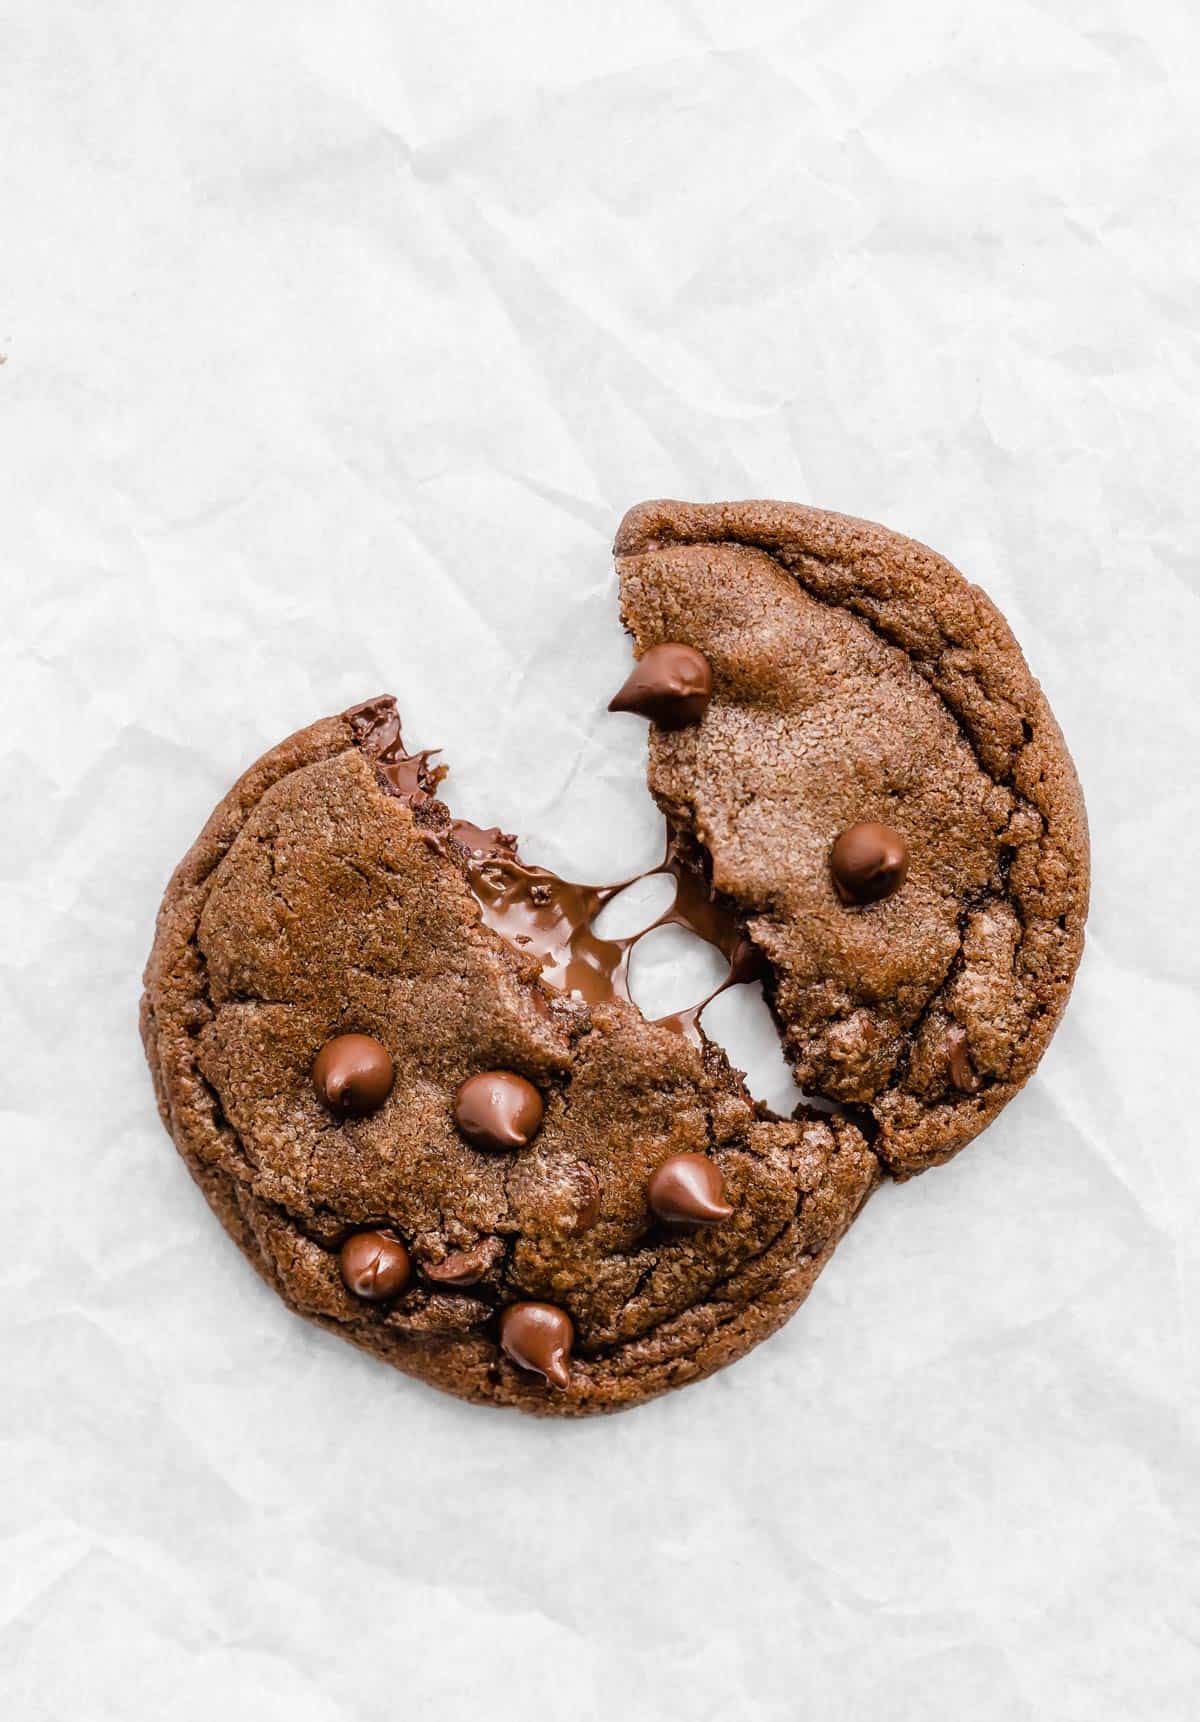 A Nutella Stuffed Nutella Cookies on a white parchment paper.